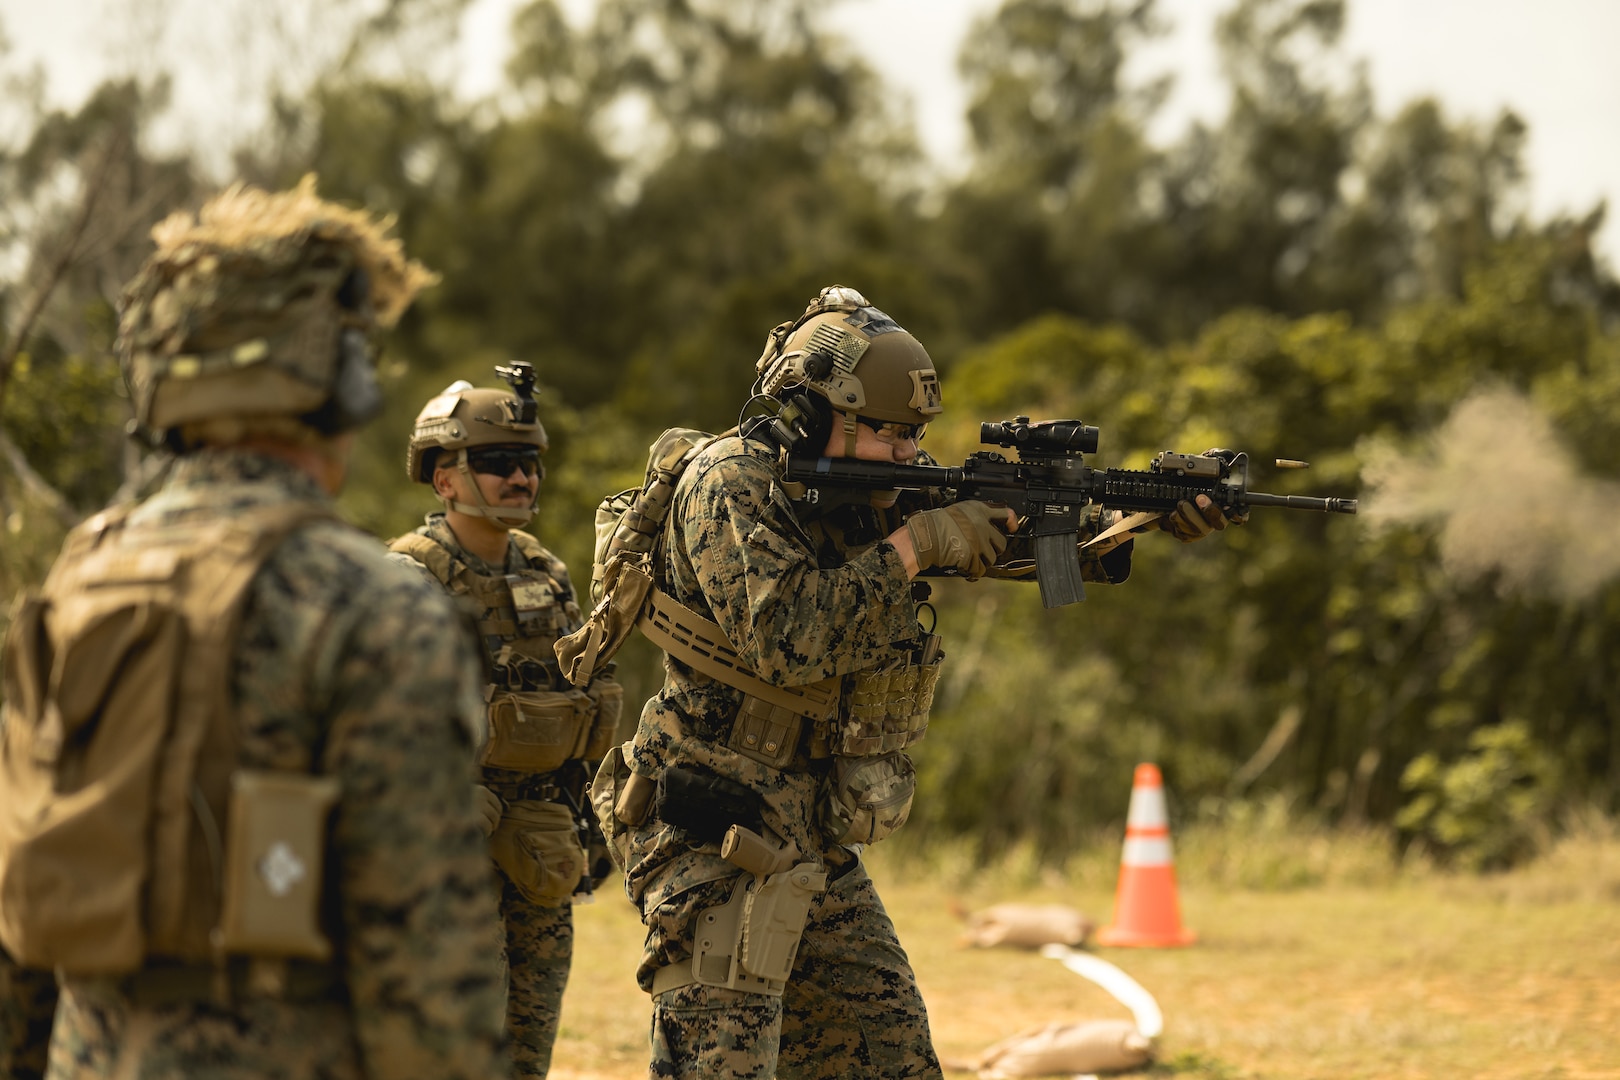 U.S. Marine Corps Staff Sgt. Sung Shin, right, a fires and effects integrator, with 5th Air Naval Gunfire Liaison Company, III Marine Expeditionary Force Information Group, fires a M4 carbine during a Marine Corps Combat Marksmanship Program range part of 2nd Brigades field exercise on Camp Hansen, Okinawa, Japan, Feb. 14, 2024. CMP allows Marines to maintain weapon proficiency by engaging targets in a competitive environment with primary and secondary weapon systems. 5th ANGLICO Marines refined their shooting fundamentals through advanced marksmanship training, enhancing their lethality. Shin is a native of Duluth, GA. (U.S. Marine Corps photo by Staff Sgt. Manuel A. Serrano)